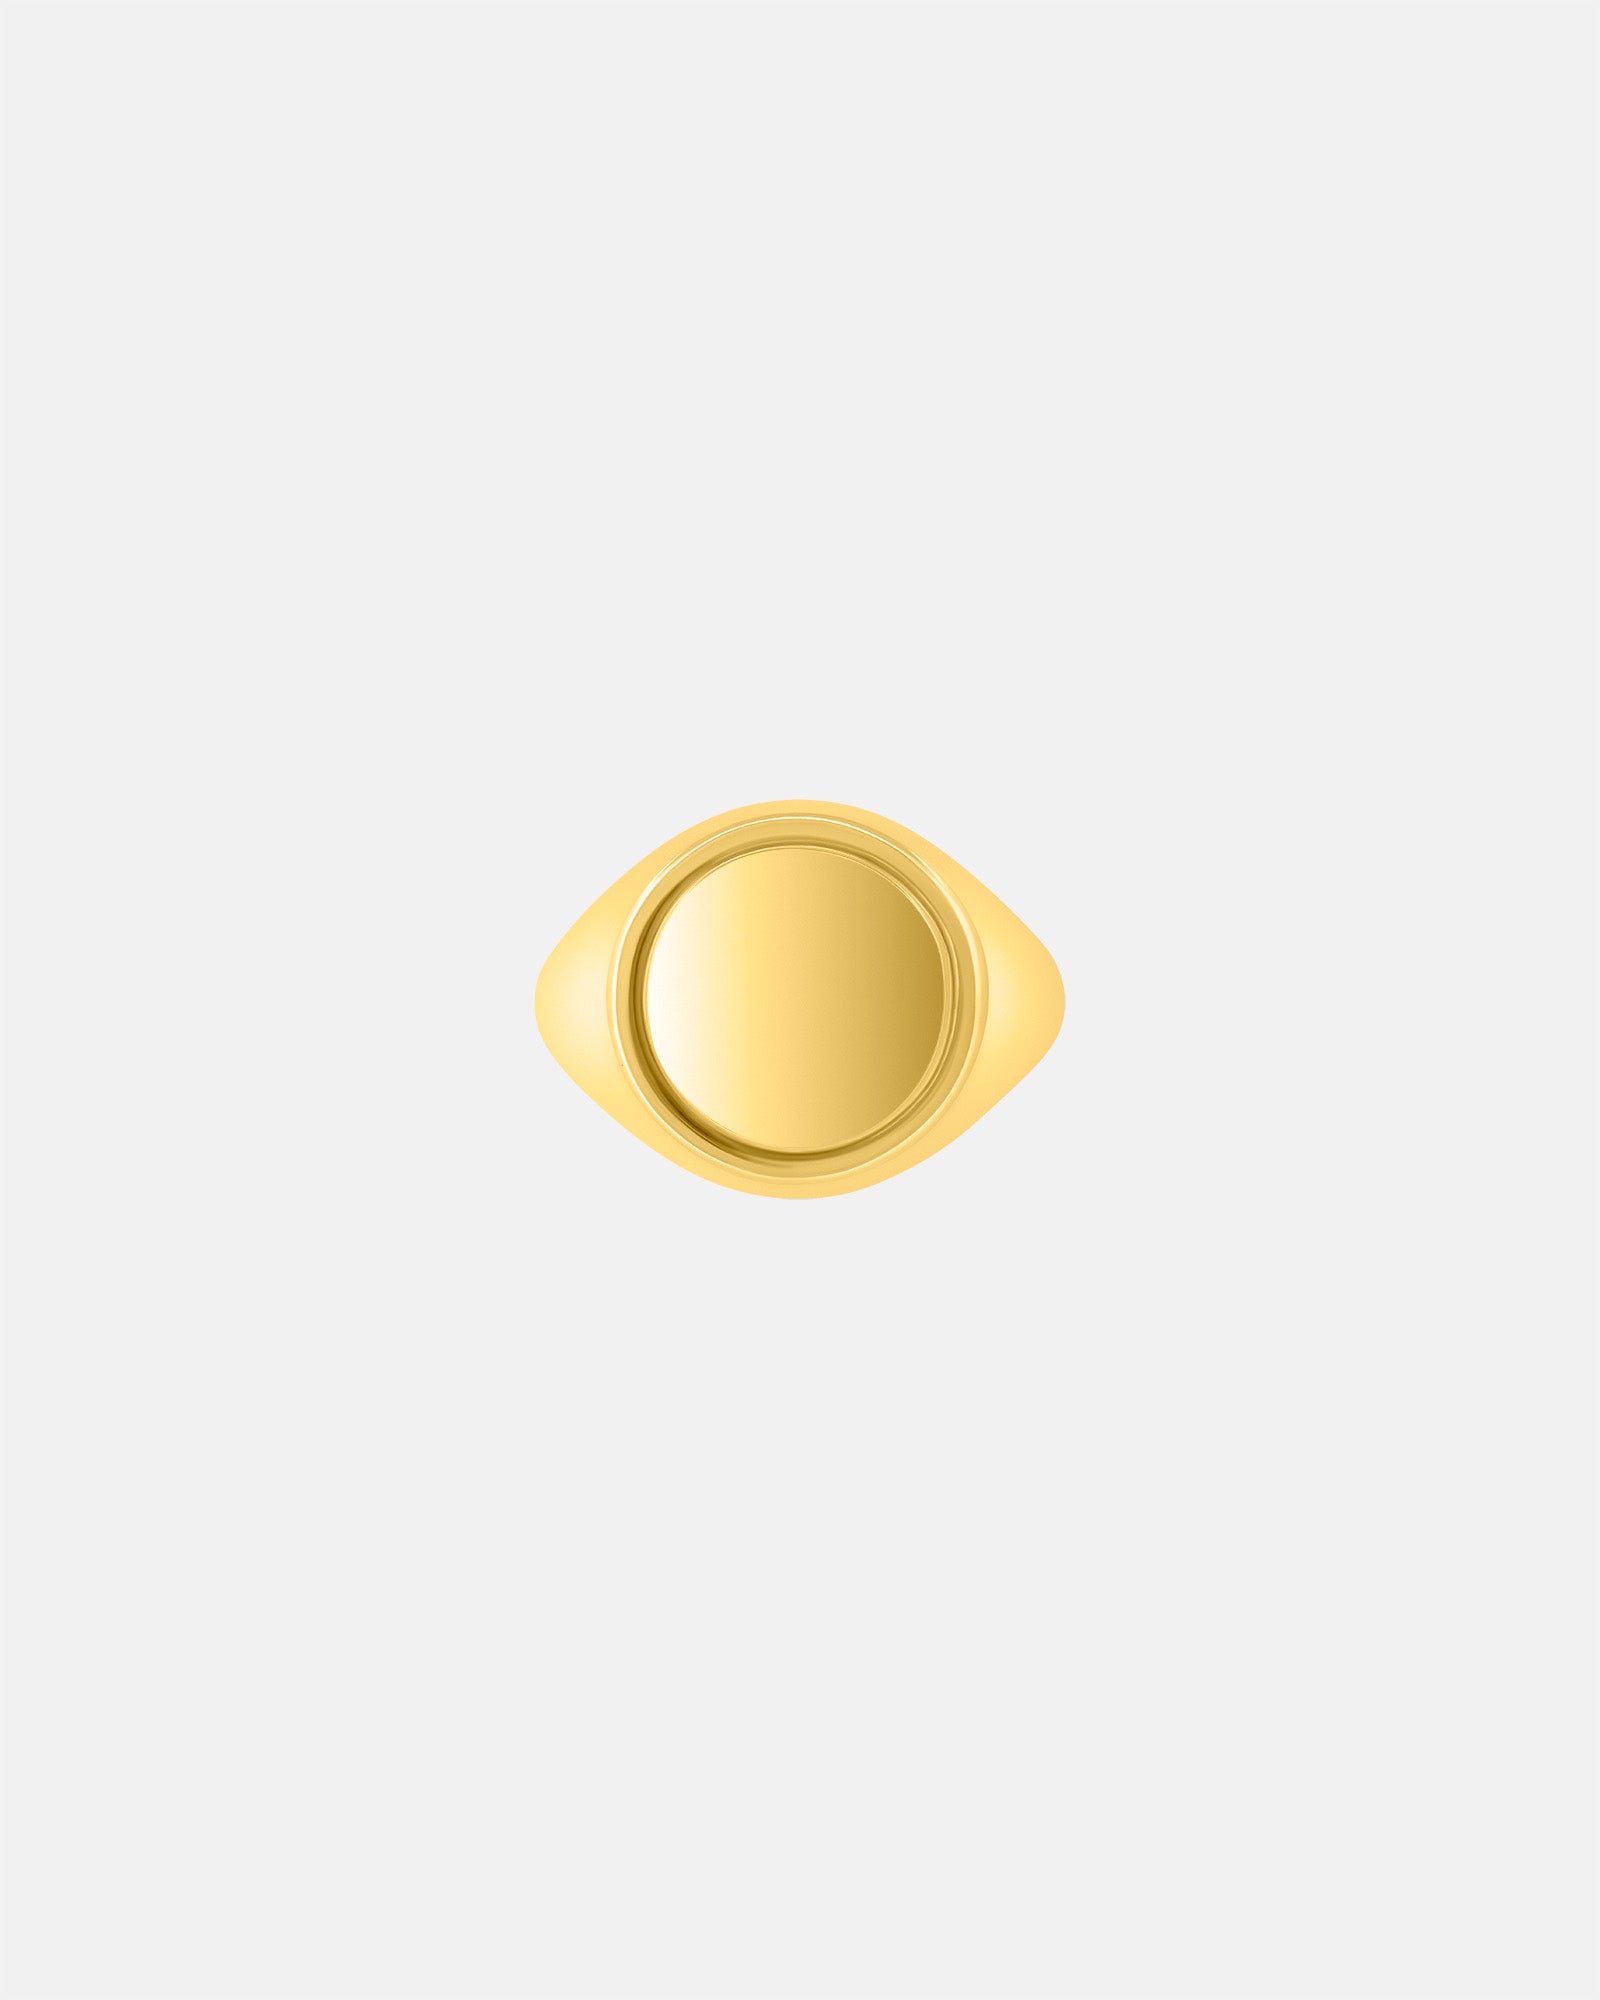 Small Round Signet Ring in 9k Yellow Gold by Wilson Grant